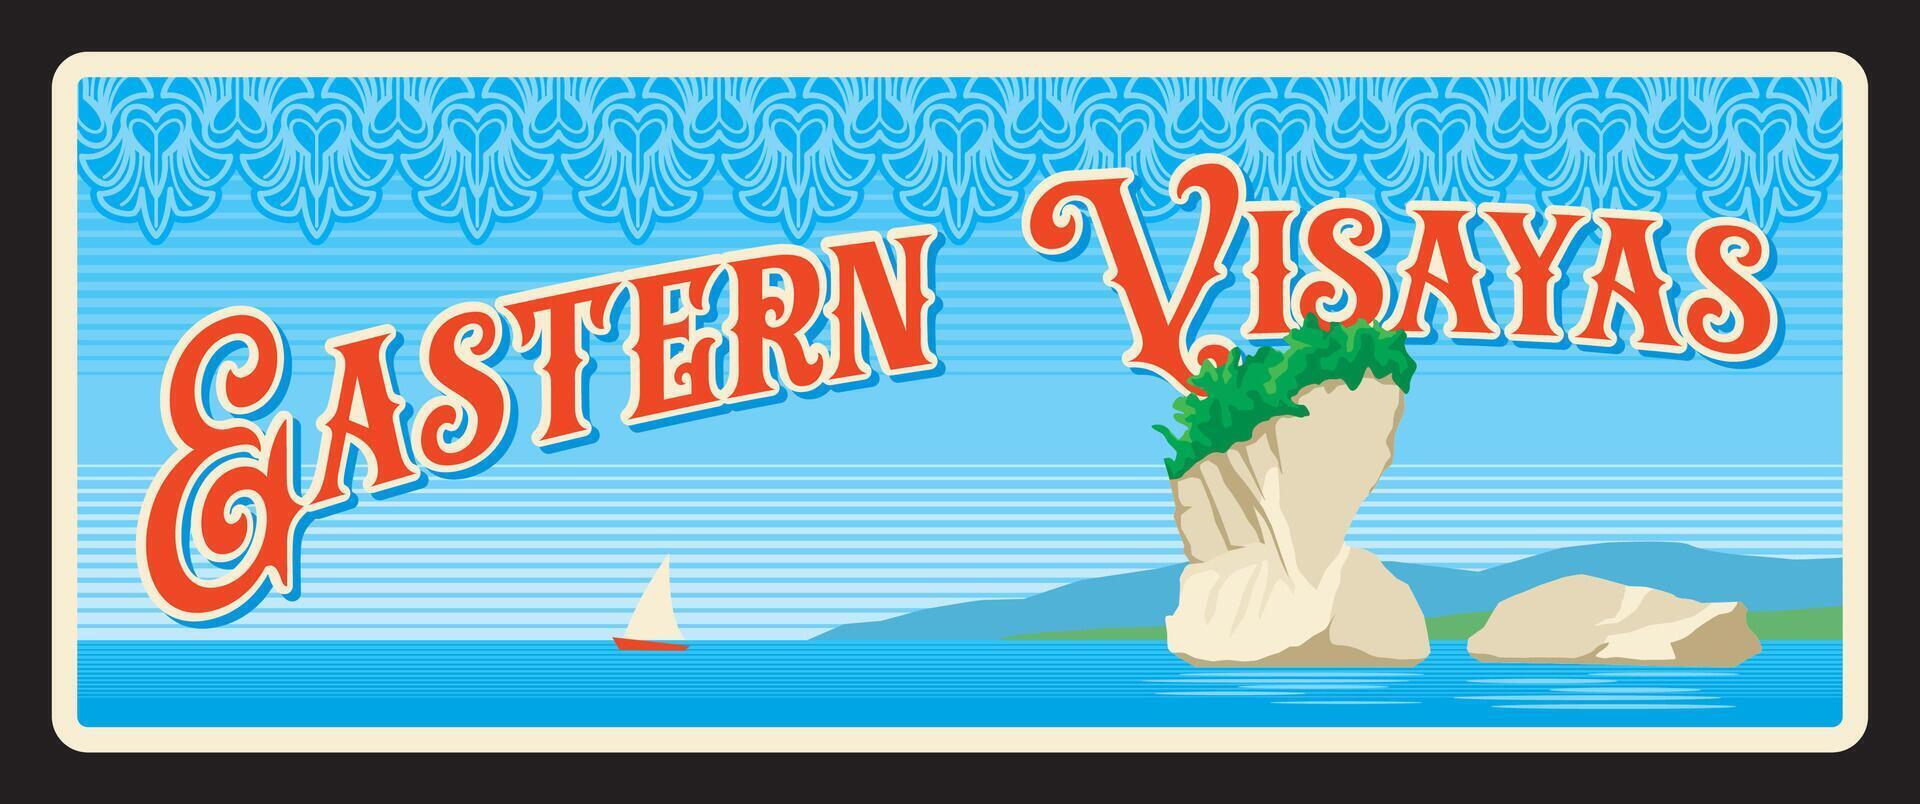 Eastern Visayas Philippines province travel plate vector